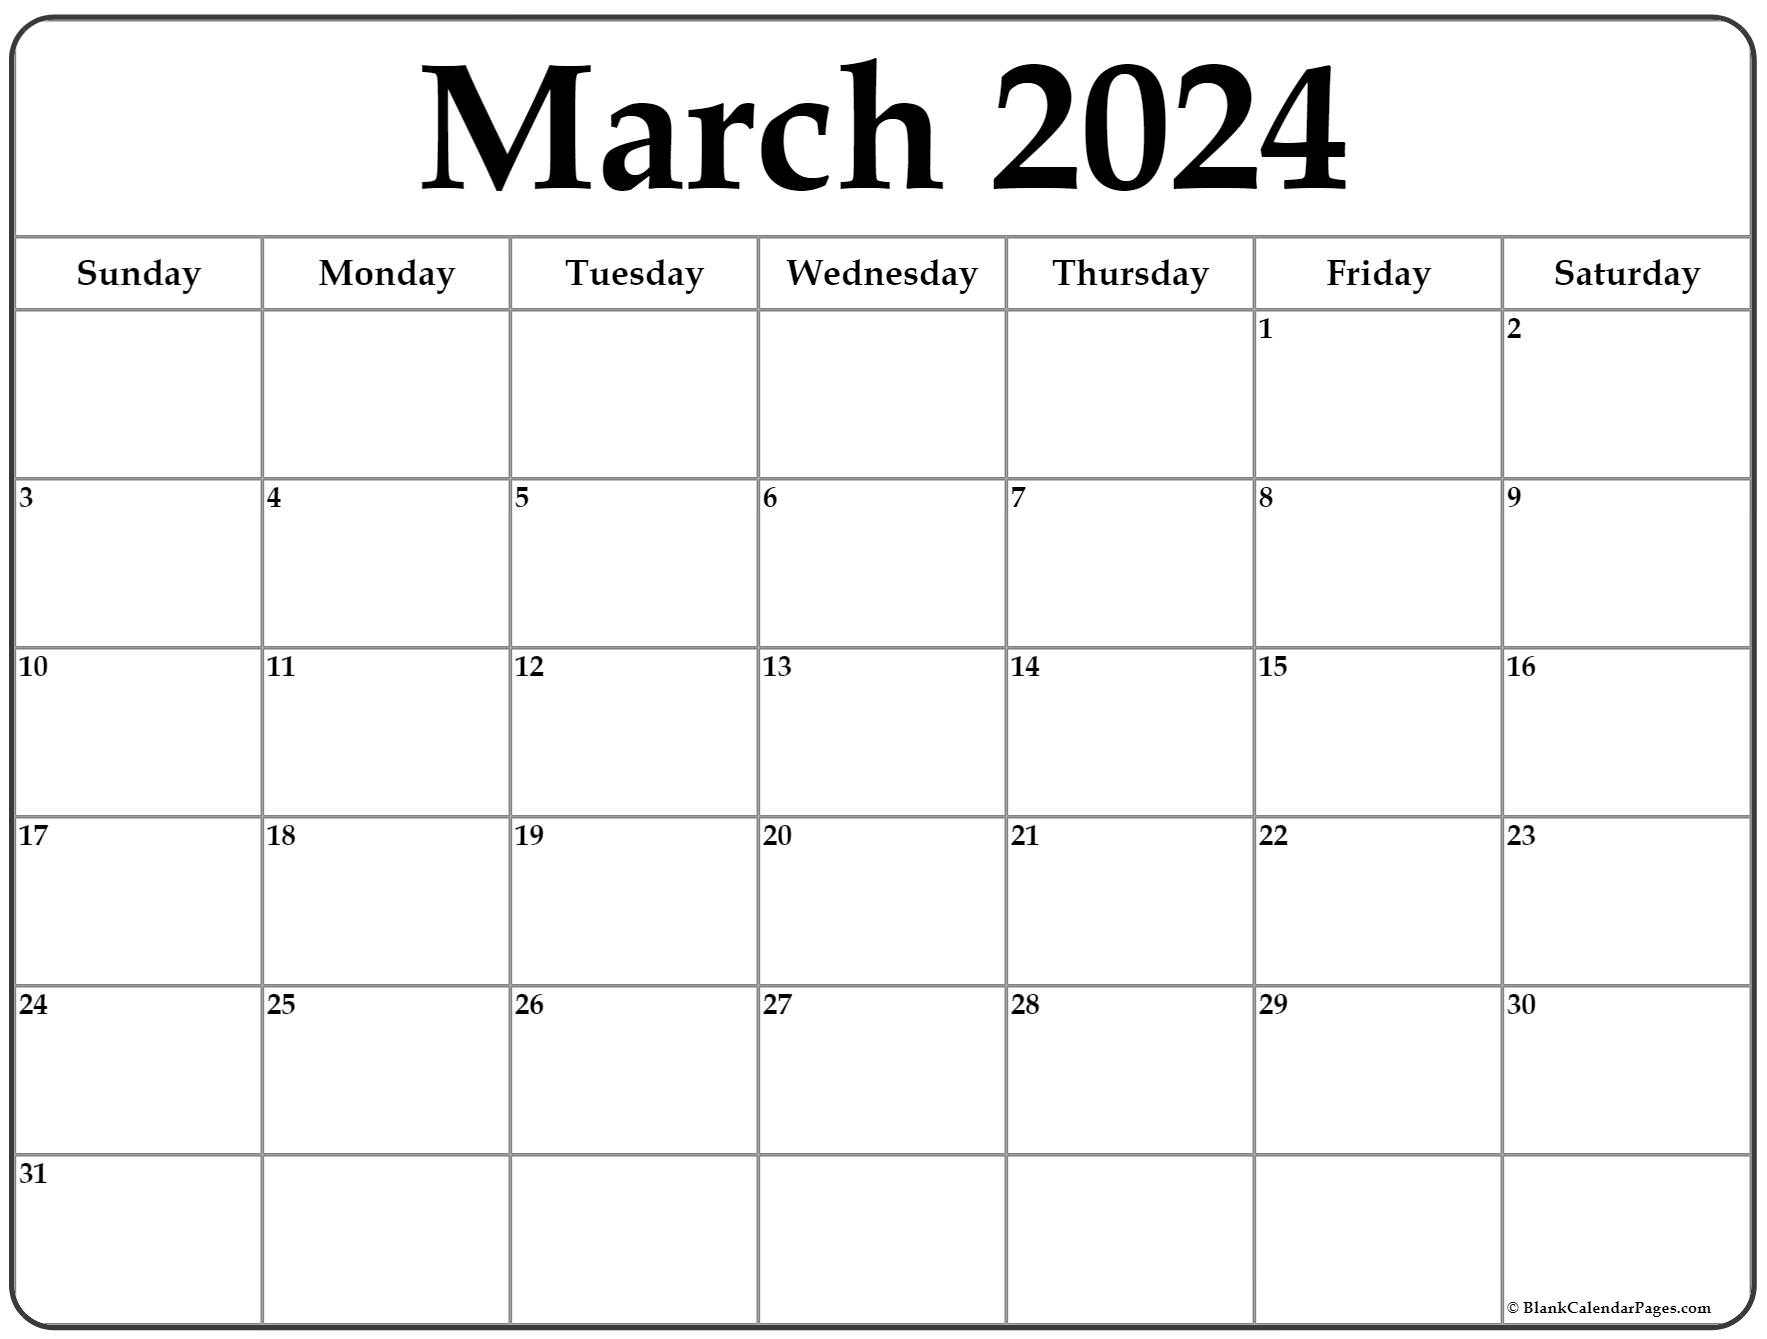 March 2024 Calendar Blank Calendar Pages To Print September And